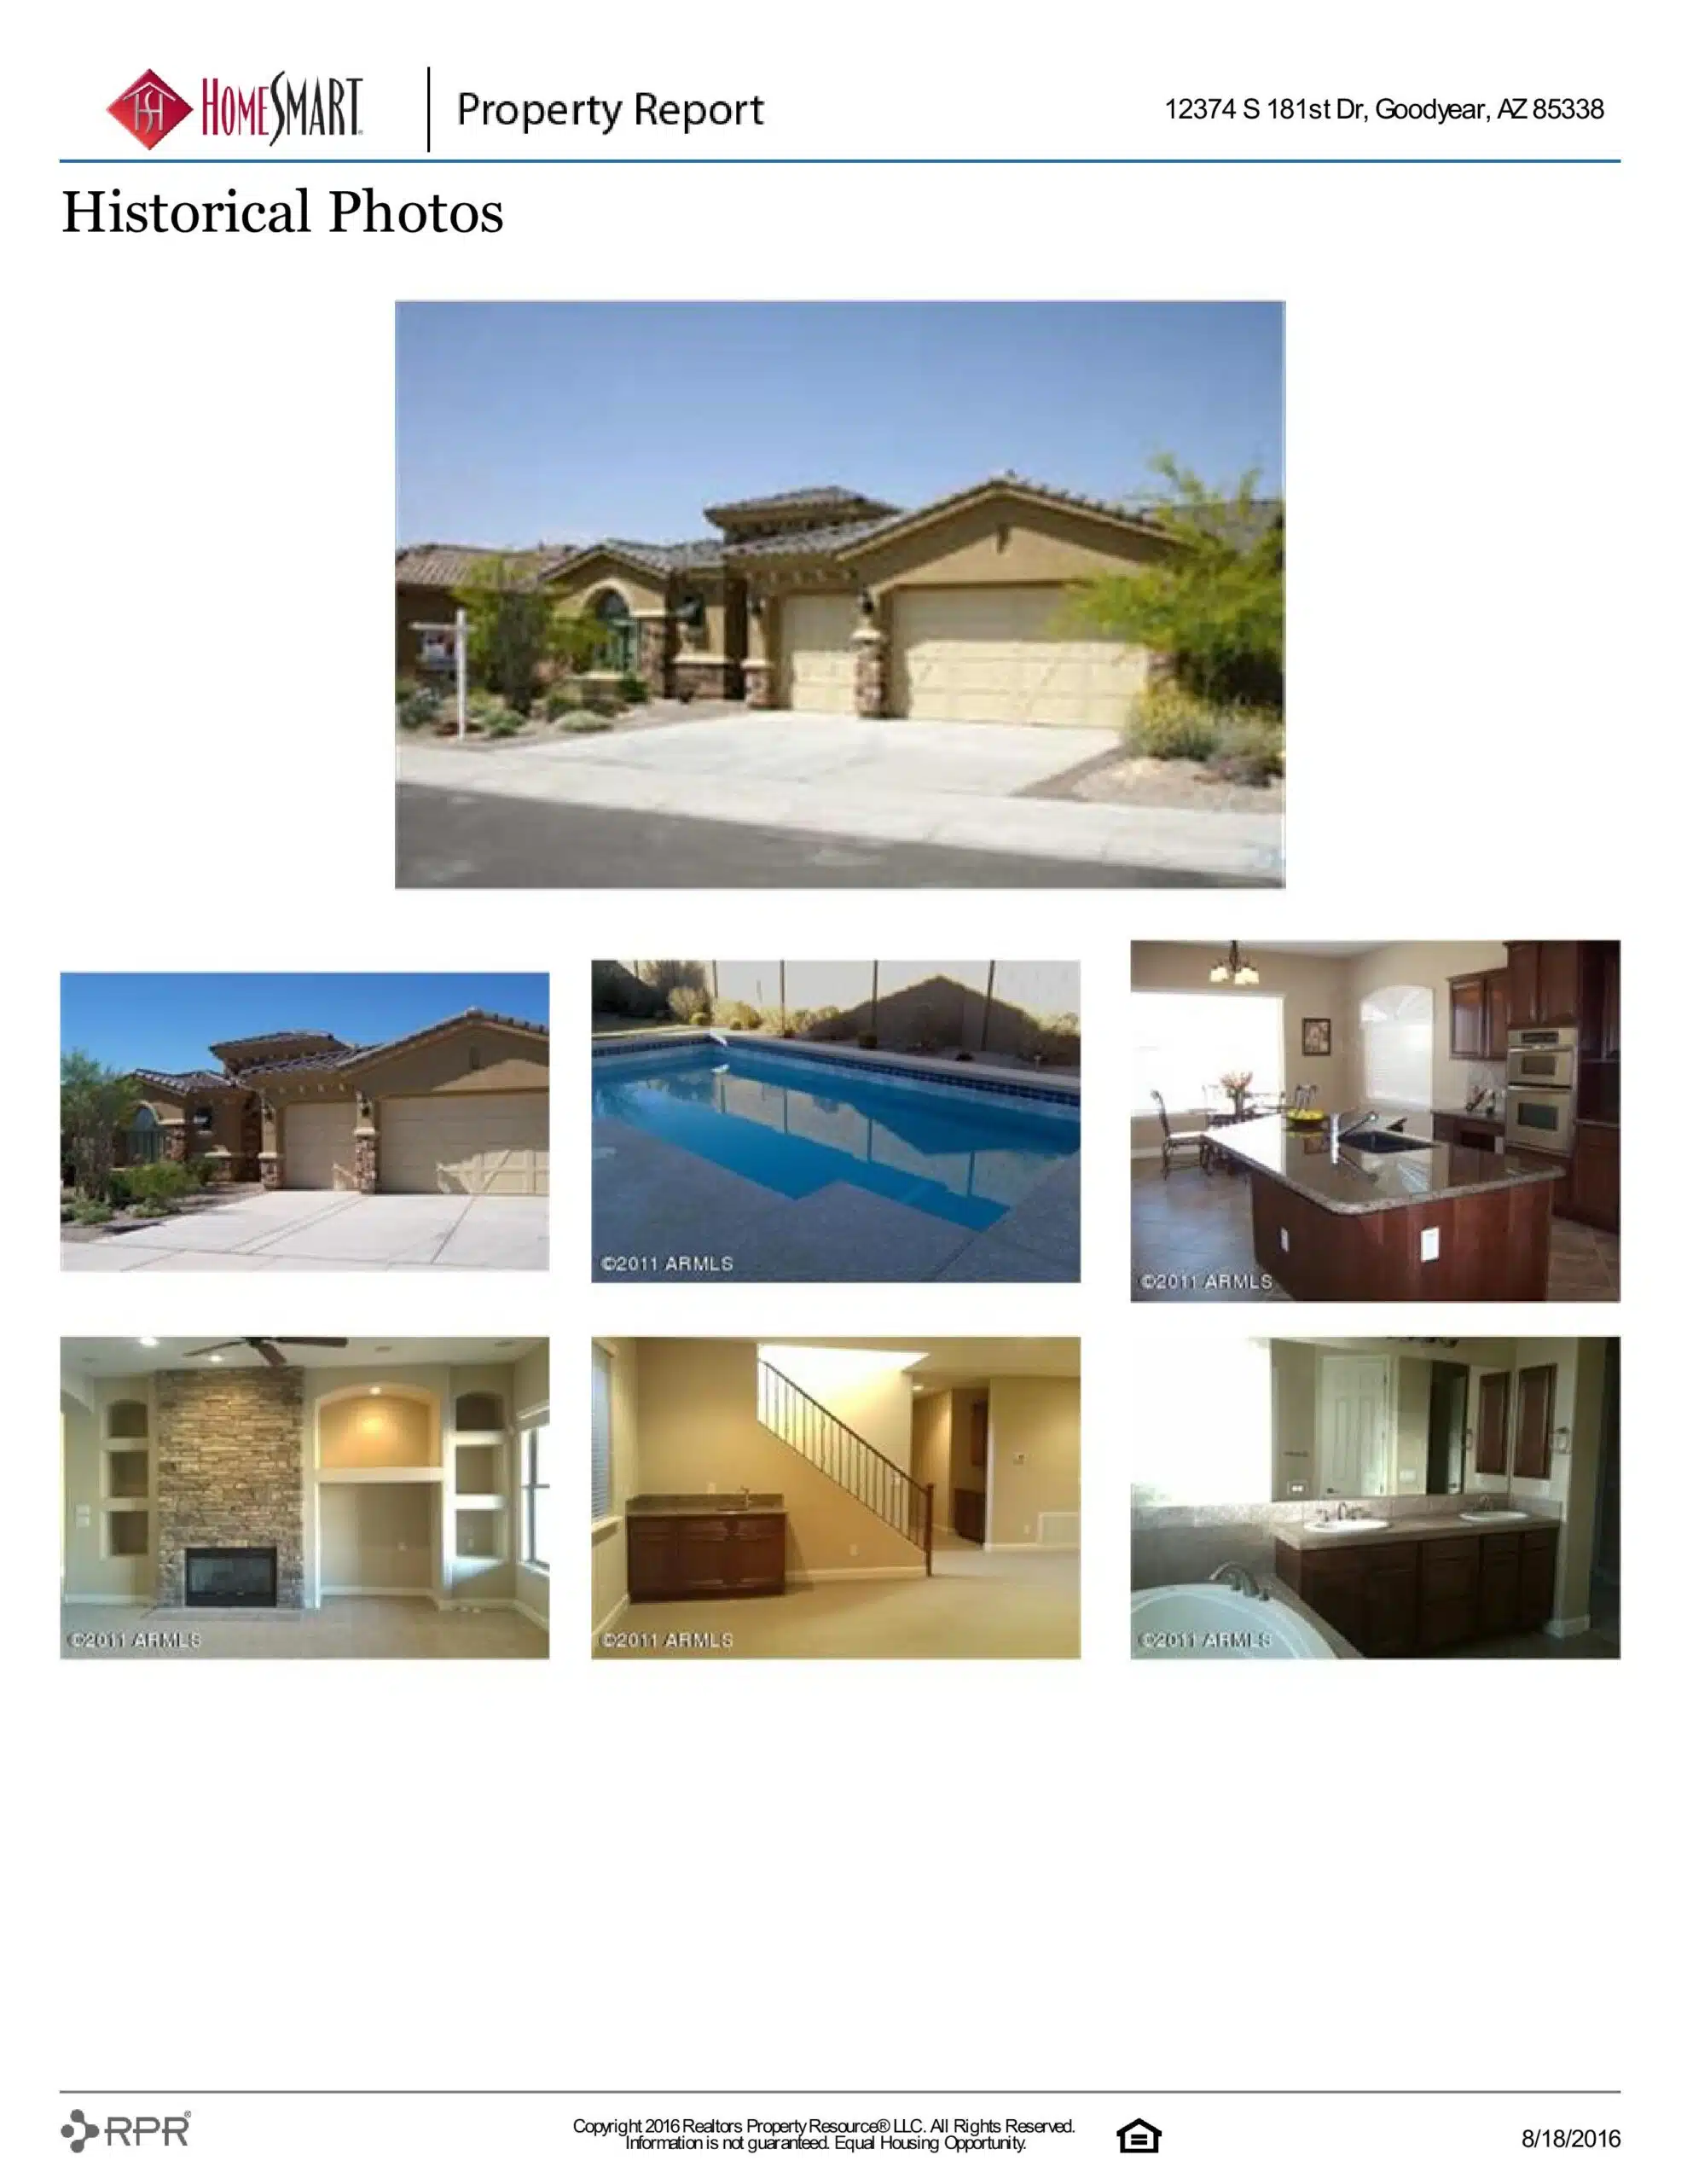 Property-Report_12374-S-181st-Dr-Goodyear-AZ-85338_2016-08-18-10-08-18-page-007